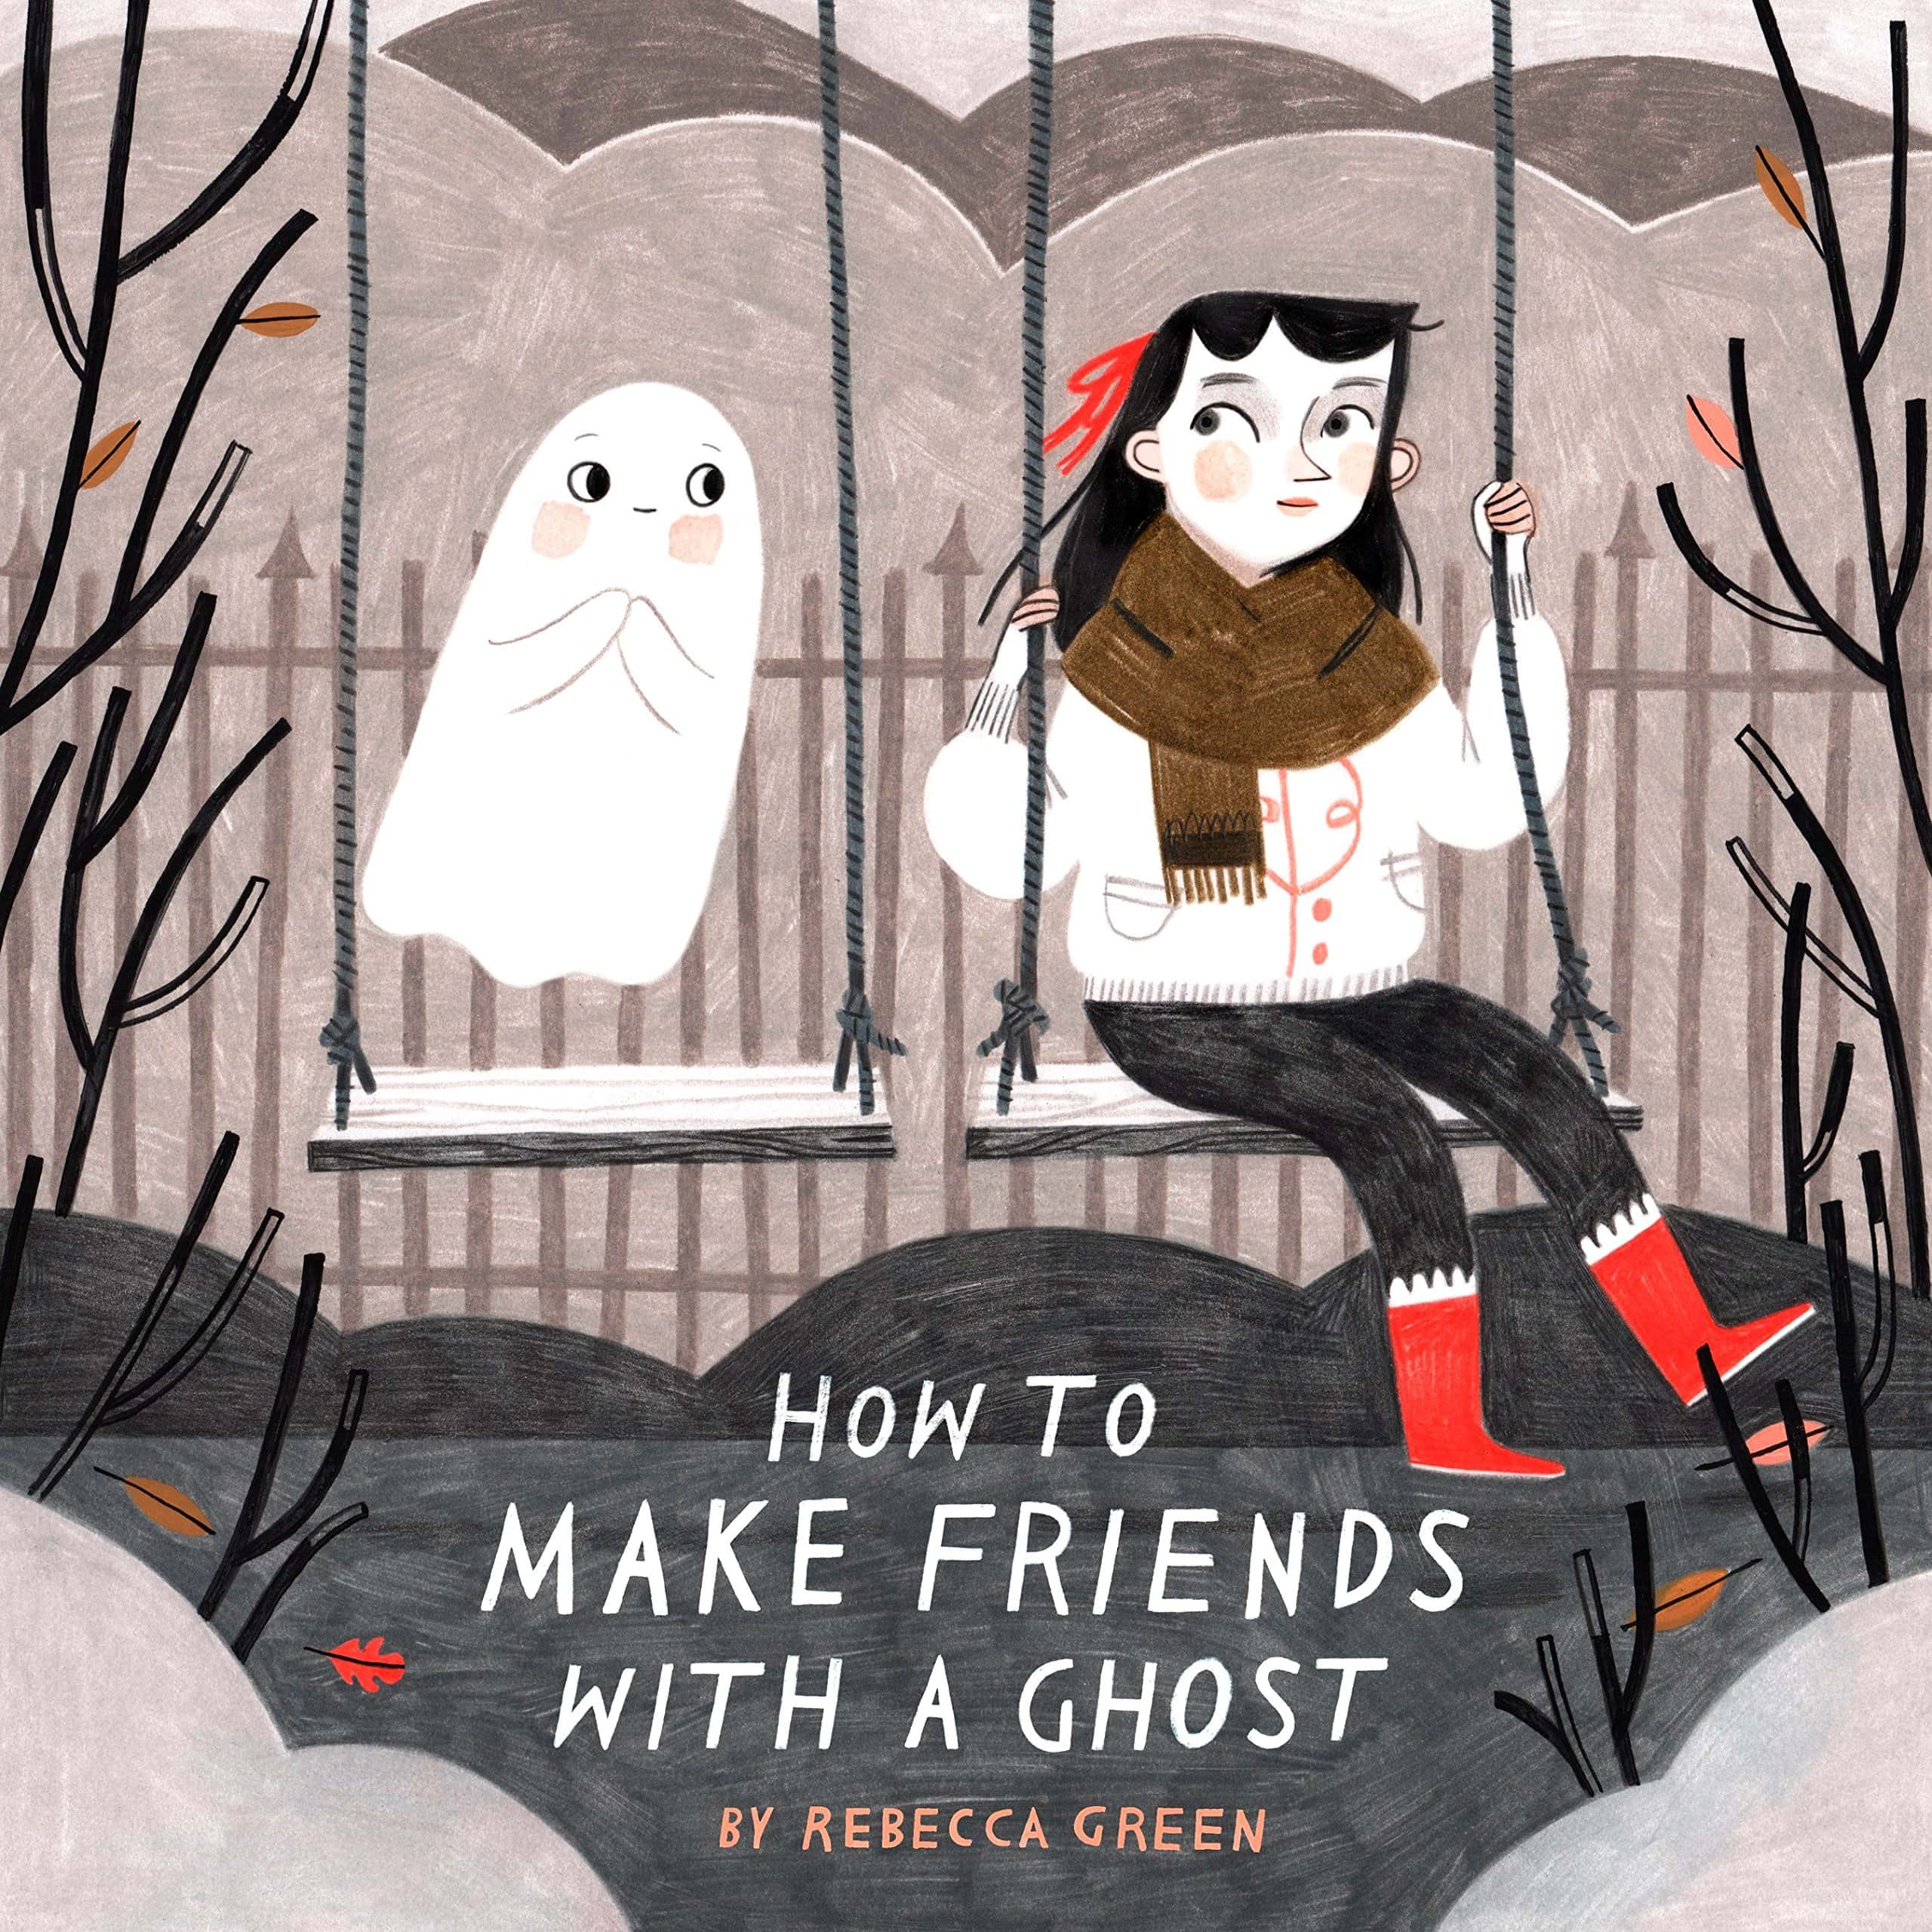 "How to Make Friends with a Ghost" by Rebecca Green